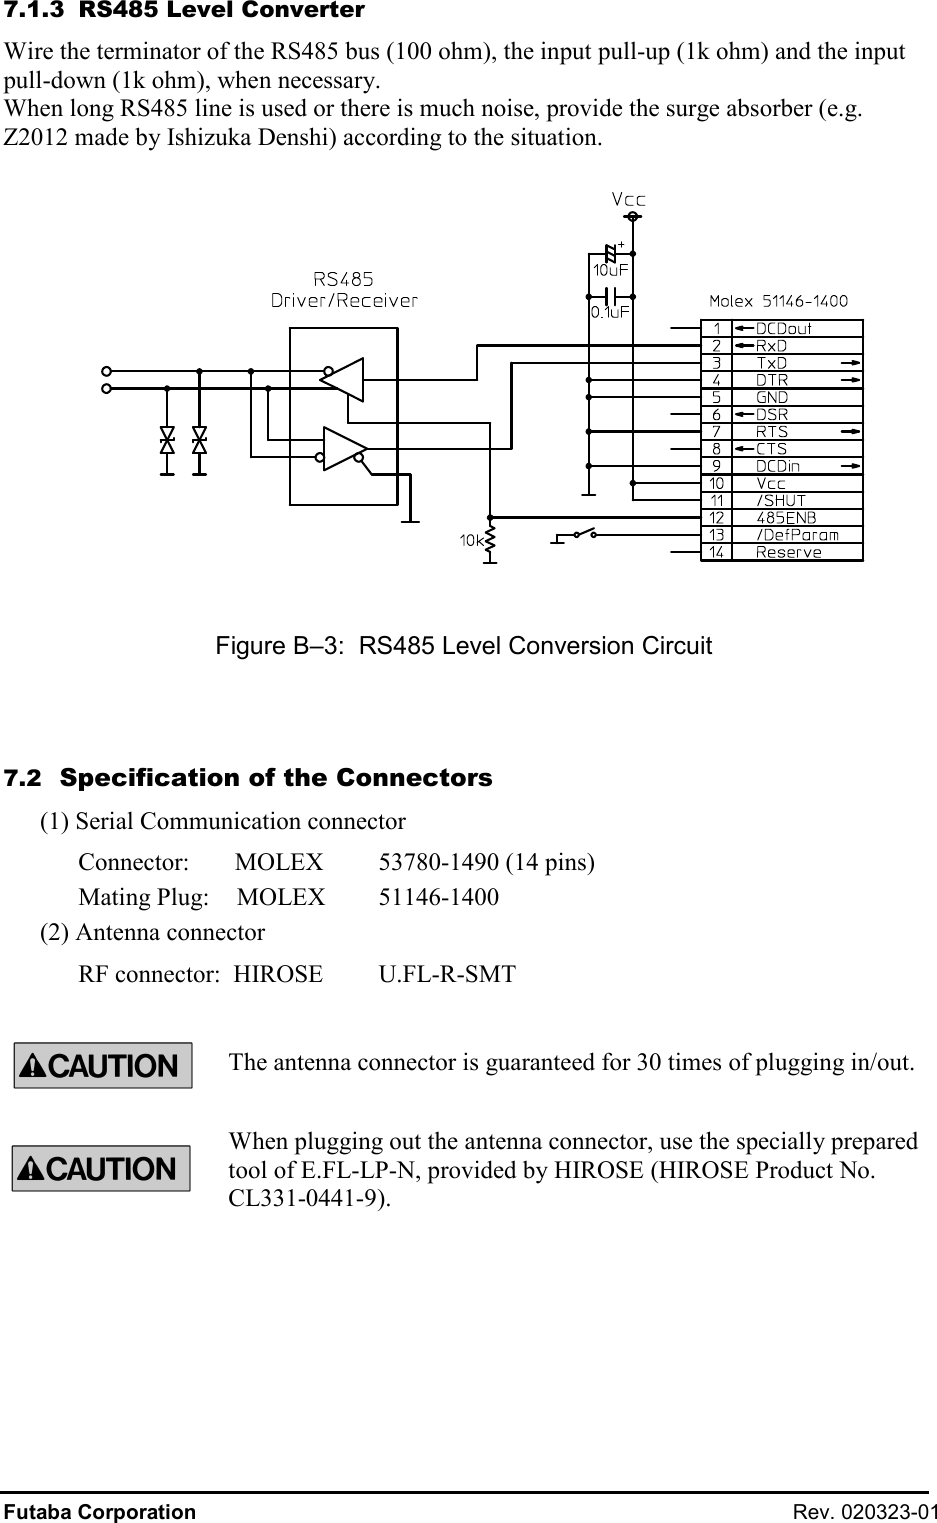 Futaba Corporation  Rev. 020323-01 7.1.3  RS485 Level Converter Wire the terminator of the RS485 bus (100 ohm), the input pull-up (1k ohm) and the input pull-down (1k ohm), when necessary. When long RS485 line is used or there is much noise, provide the surge absorber (e.g. Z2012 made by Ishizuka Denshi) according to the situation.    Figure B–3:  RS485 Level Conversion Circuit  7.2  Specification of the Connectors (1) Serial Communication connector Connector:     MOLEX   53780-1490 (14 pins) Mating Plug:    MOLEX   51146-1400 (2) Antenna connector RF connector:  HIROSE  U.FL-R-SMT  The antenna connector is guaranteed for 30 times of plugging in/out. When plugging out the antenna connector, use the specially prepared tool of E.FL-LP-N, provided by HIROSE (HIROSE Product No. CL331-0441-9).   